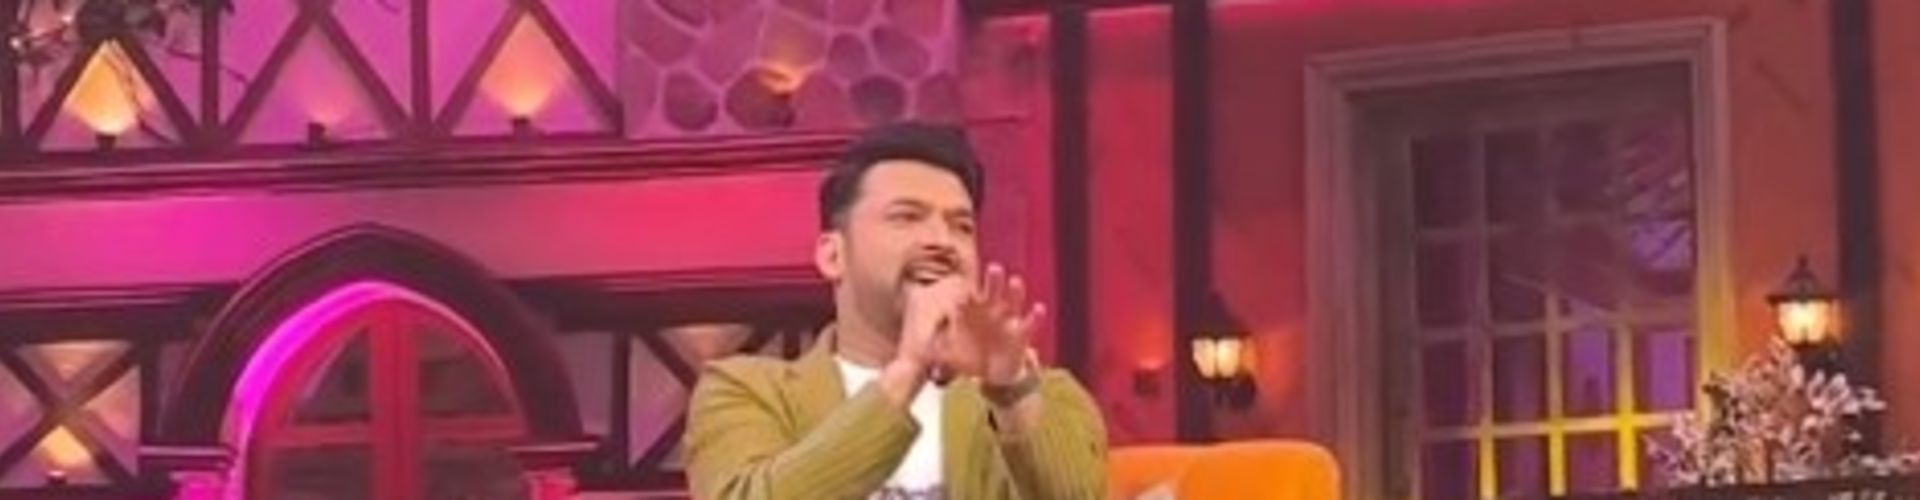 Kapil Sharma Pays A Tribute To Late Singer KK, Croons His Hit Single